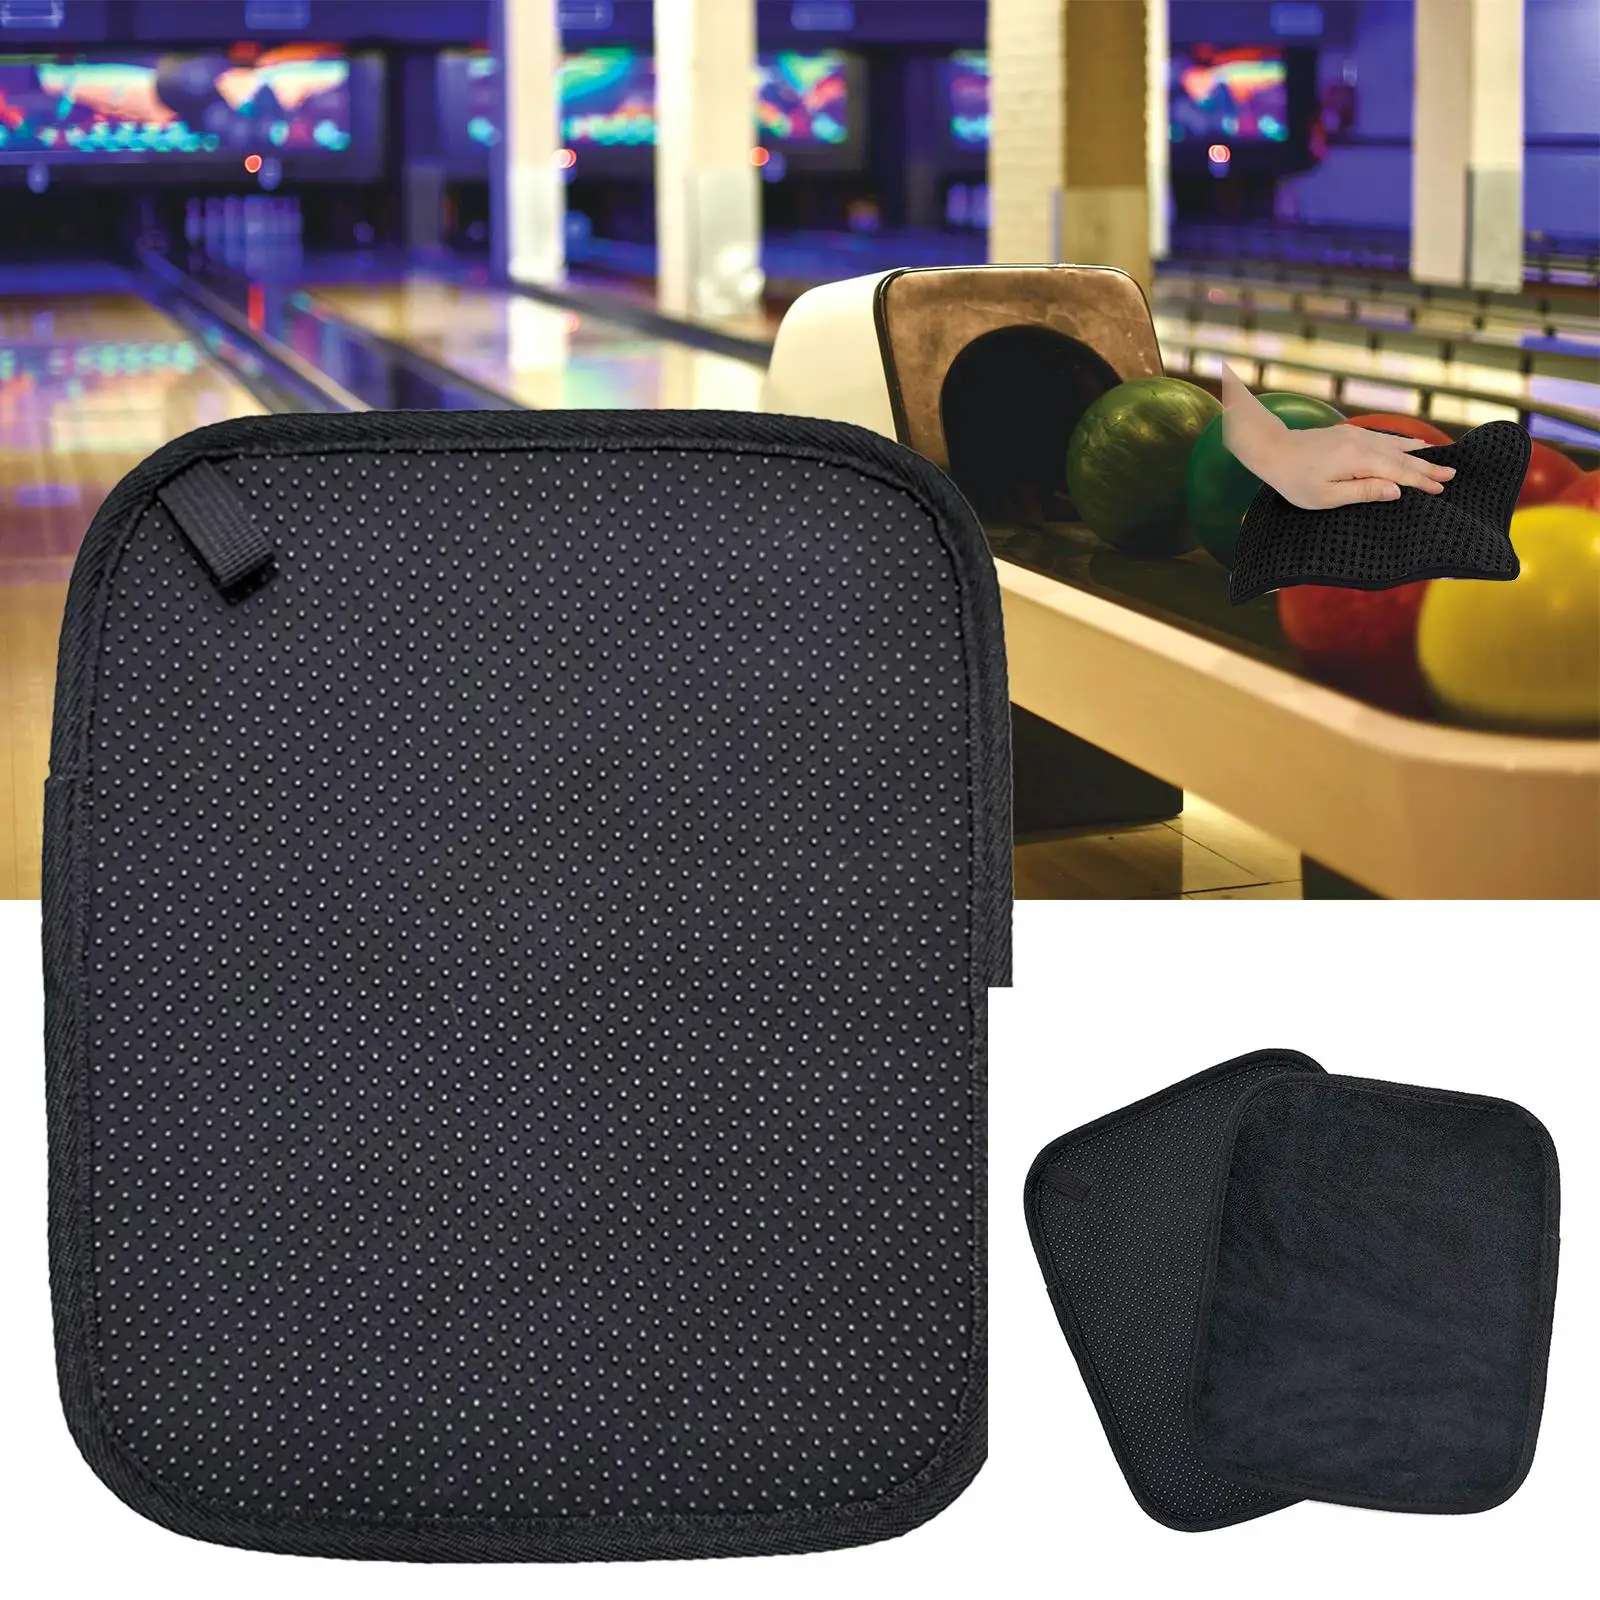 Bowling Ball Towel Bowling Shammy Pad with Easy Grip Dots 8inchx10inch Ball Polisher Bowling Ball Cleaning Removes Dirt and Oil